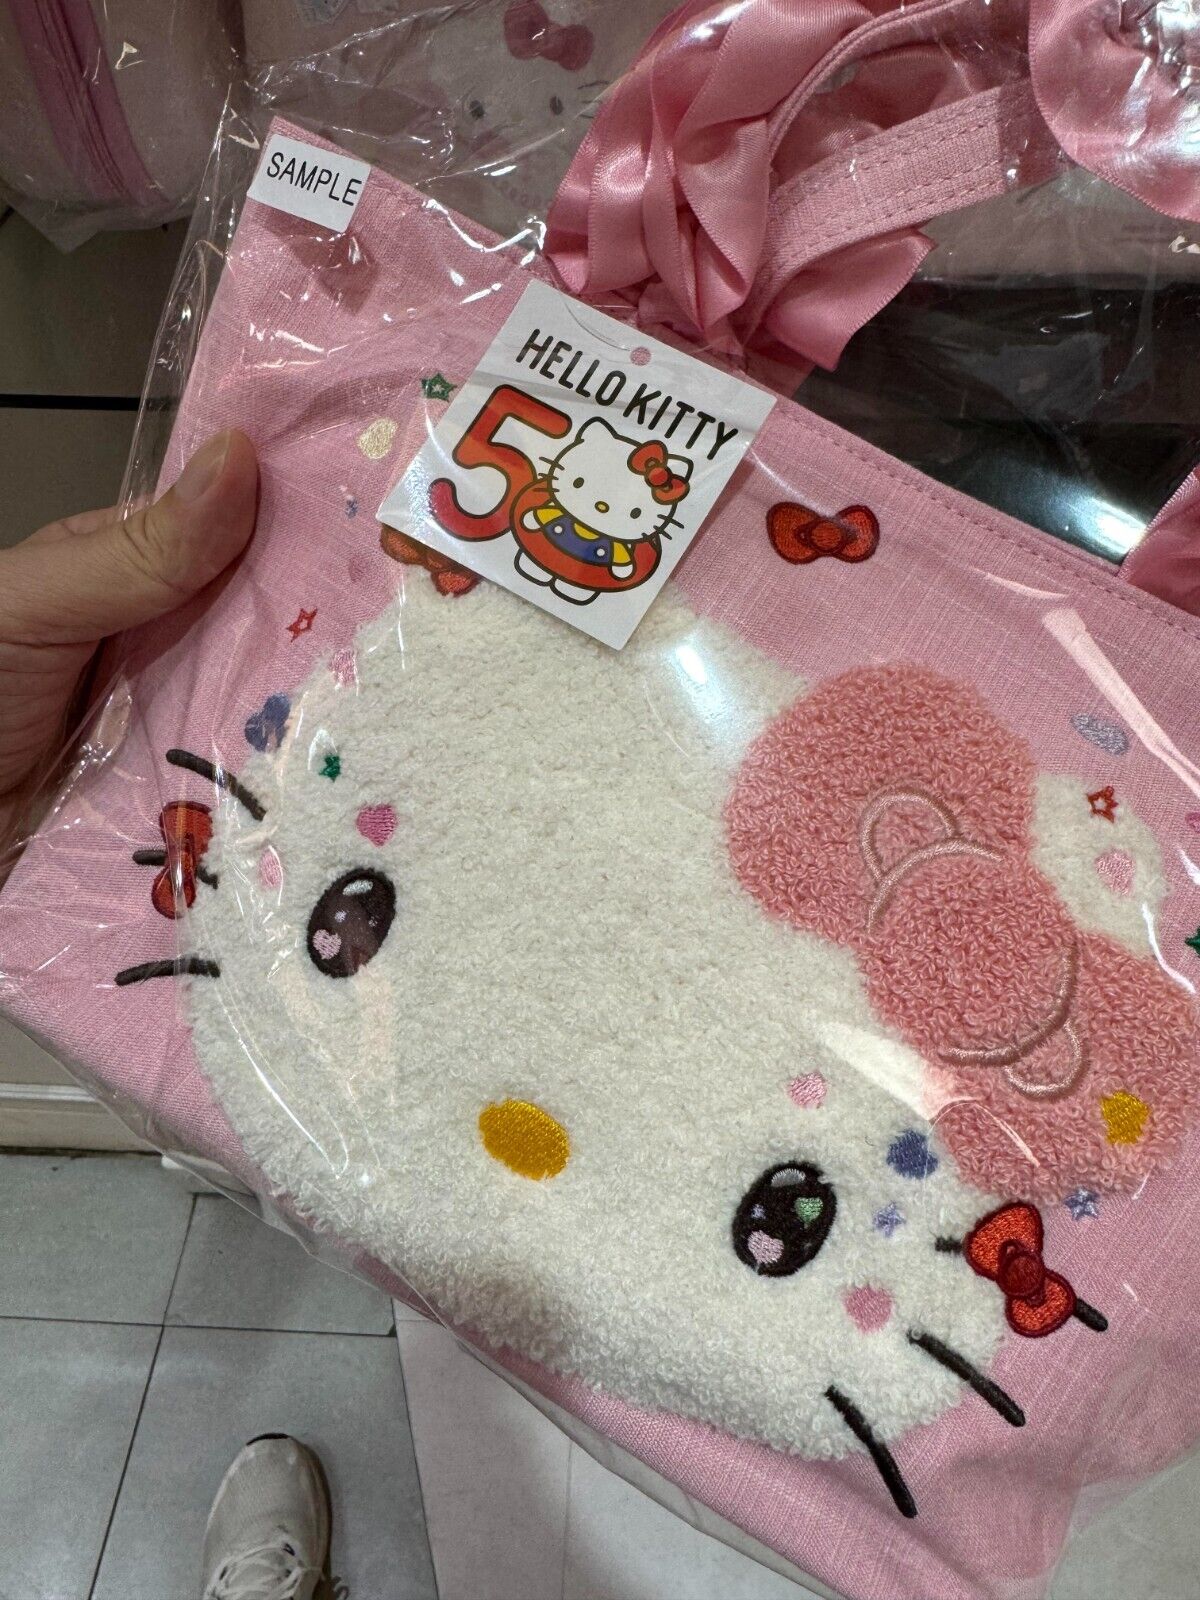 limited edition hello kitty 50th anniversary tote bag from South Korea